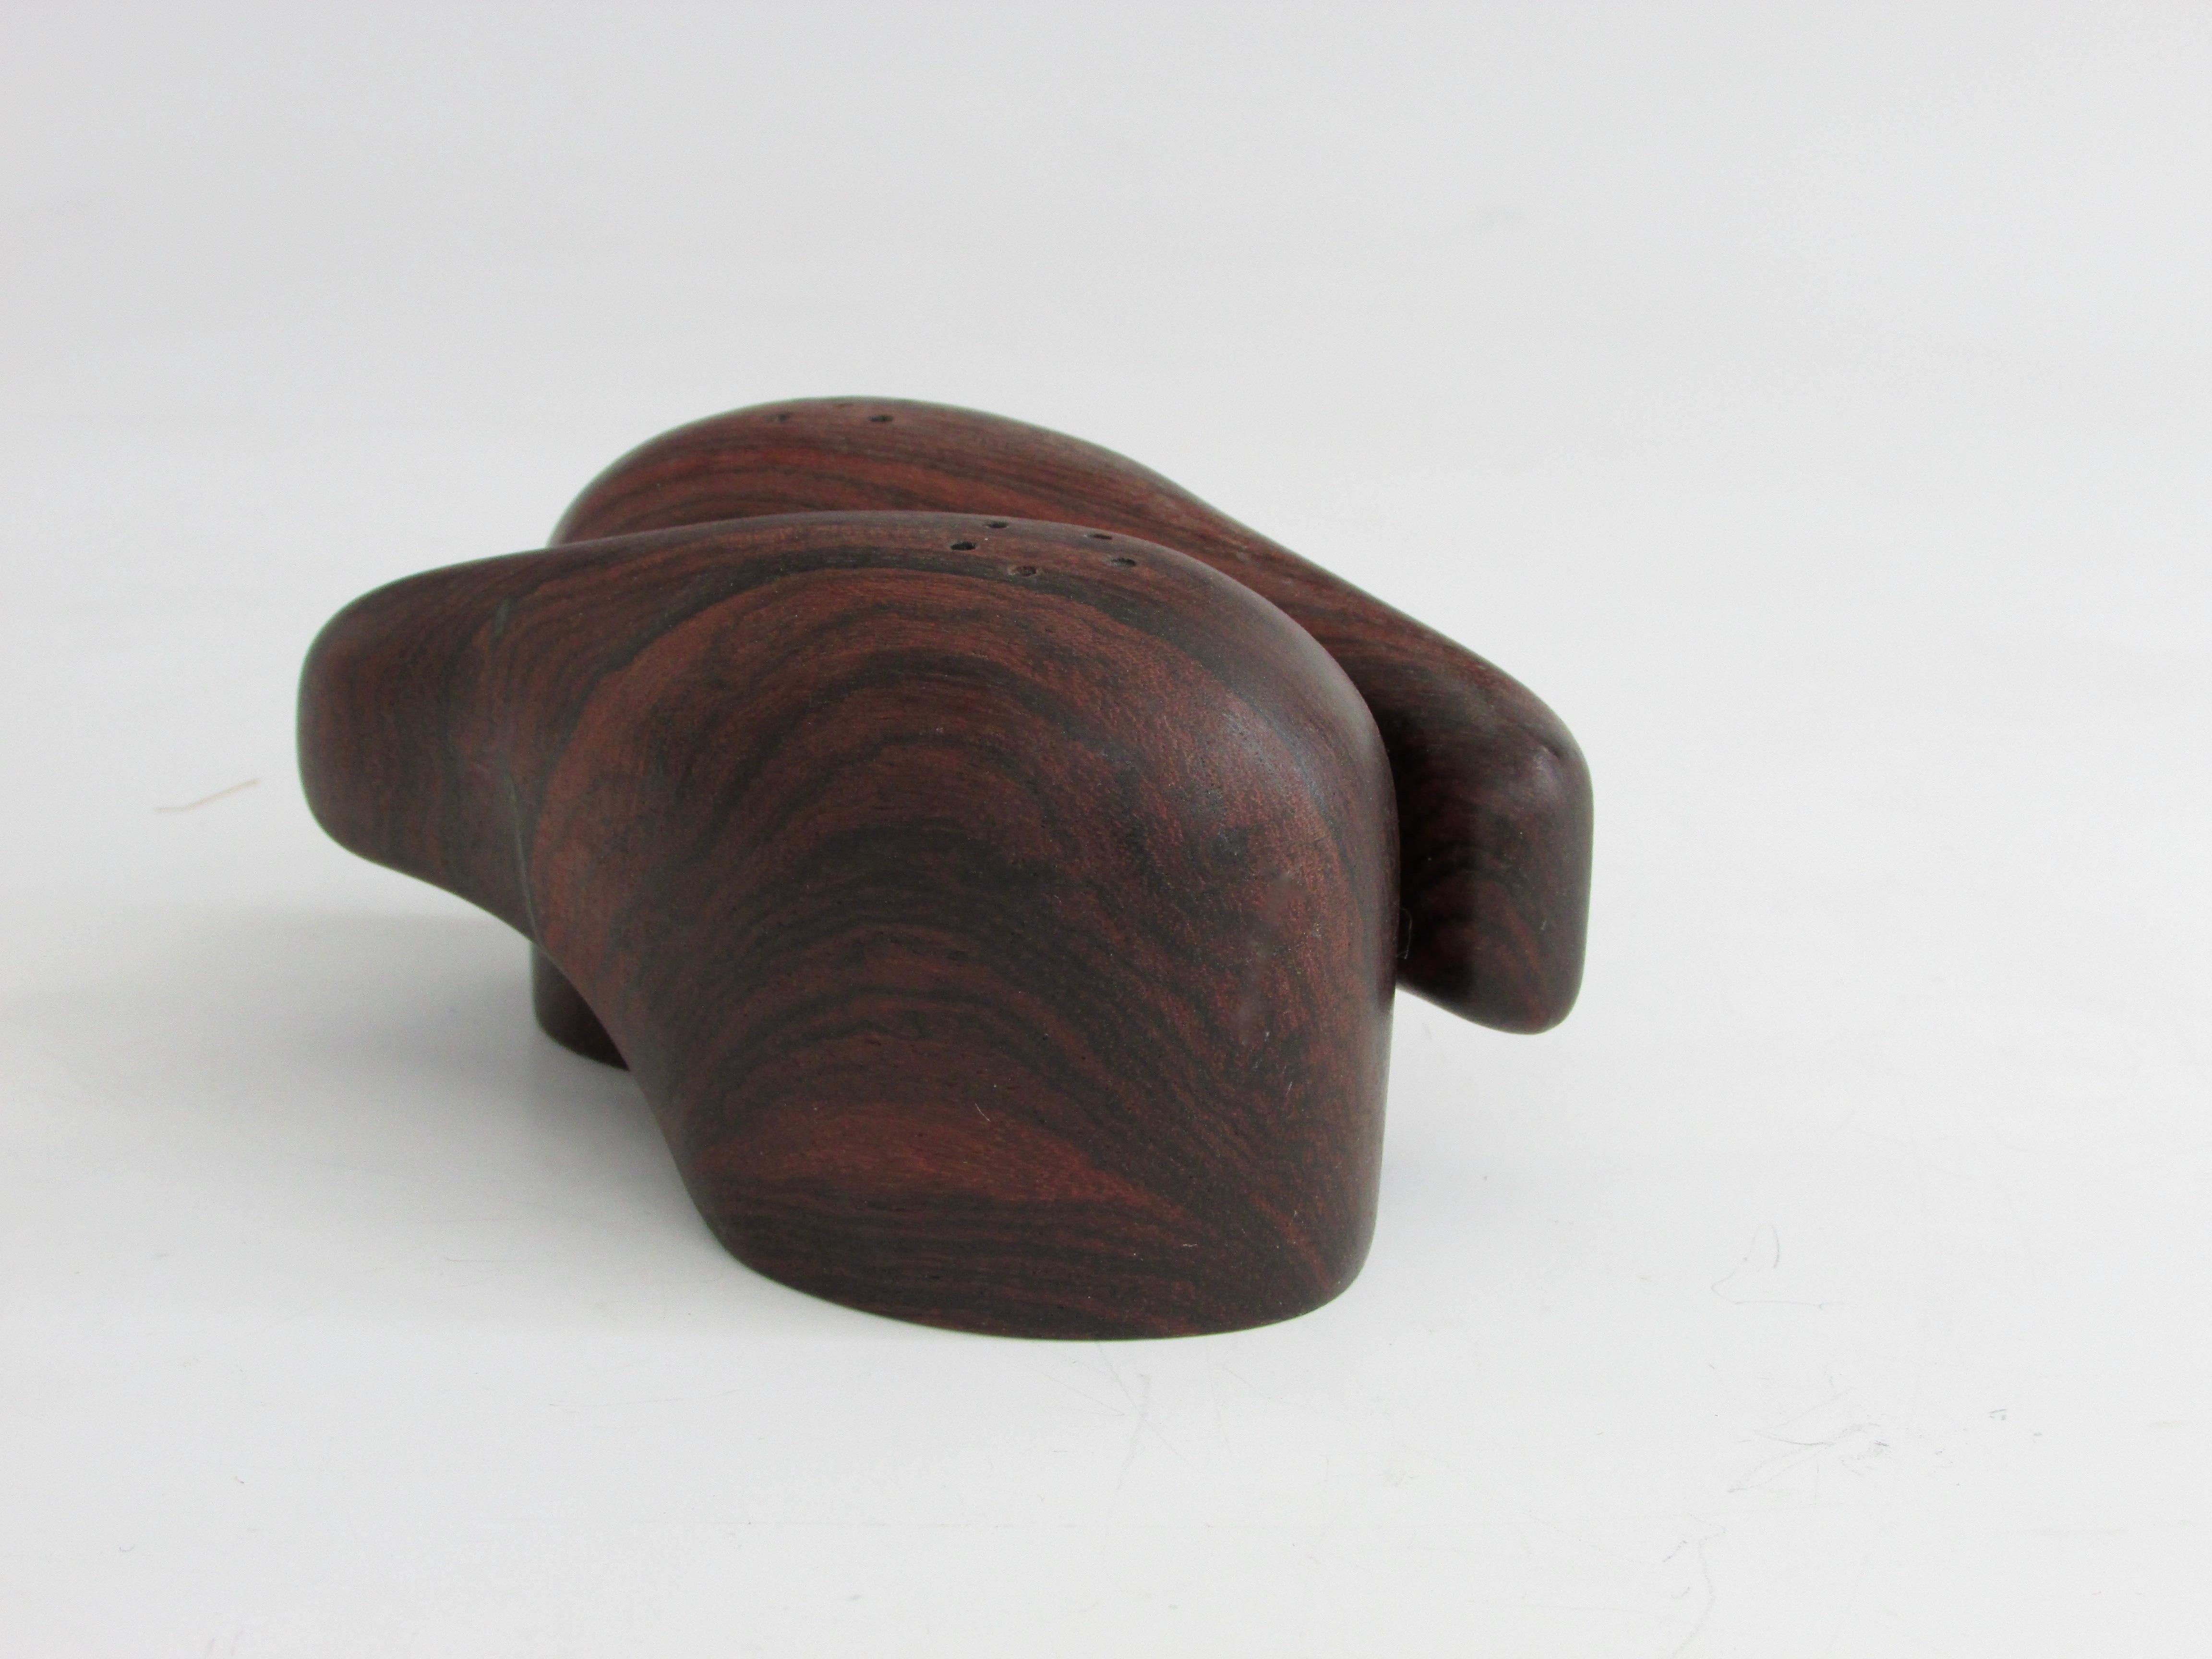 Pair of Danish Rosewood Modernist Salt Pepper Shakers In Good Condition For Sale In Ferndale, MI